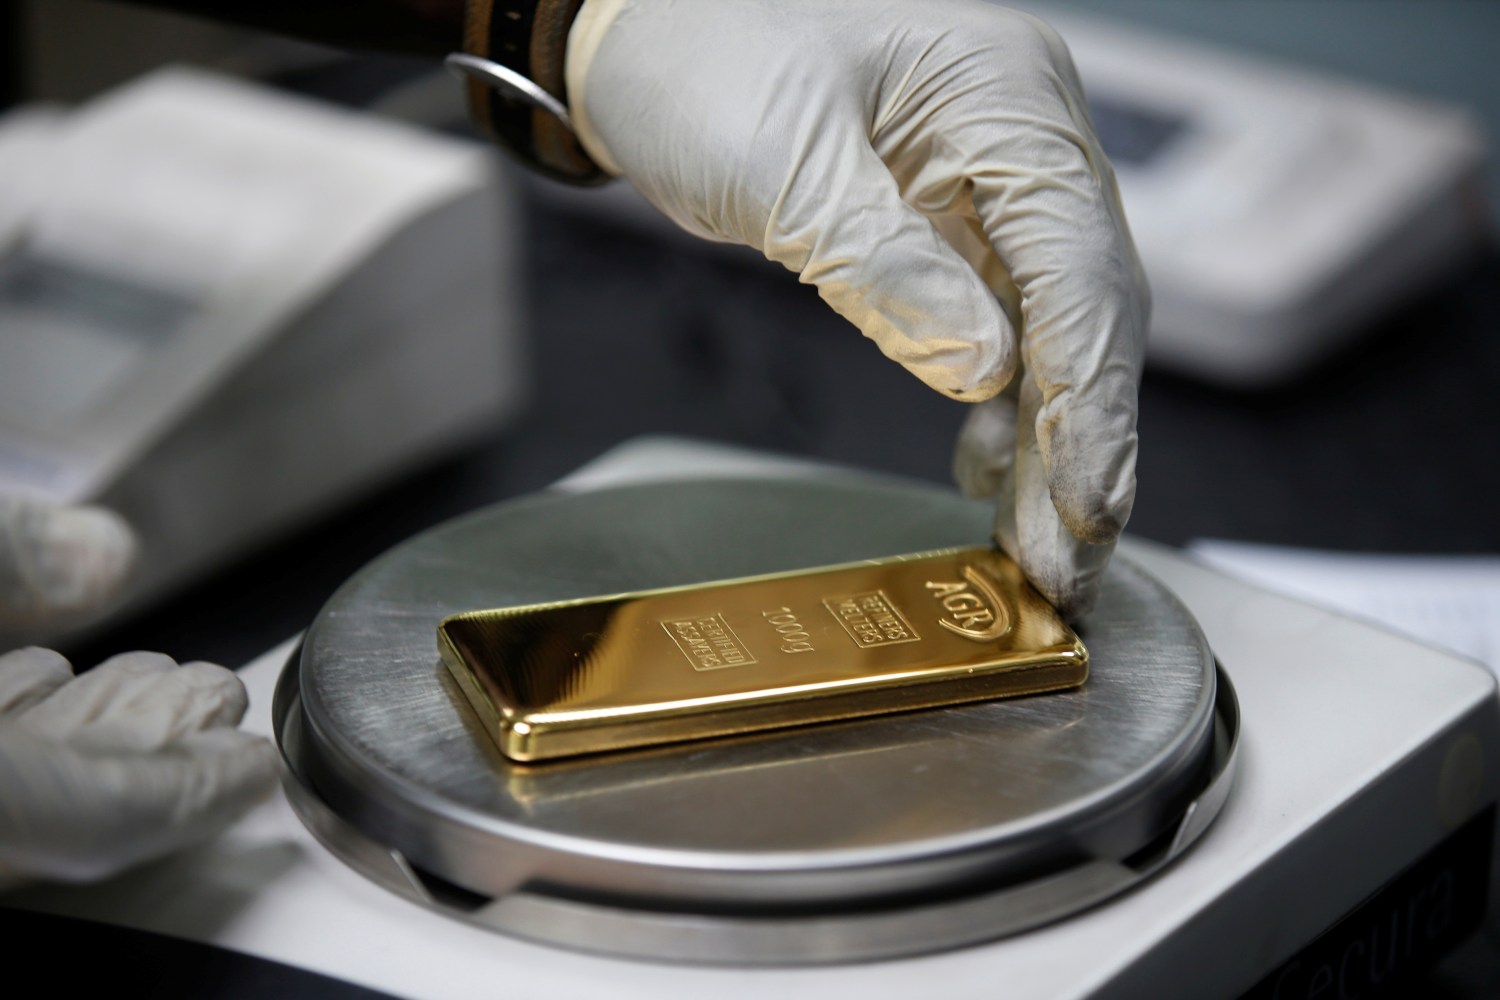 An employee weighs a 1kg gold bar at AGR (African Gold Refinery) in Entebbe, Uganda, October 4, 2018. Picture taken October 4, 2018. To match Insight AFRICA-GOLD/REFINERIES     REUTERS/Baz Ratner